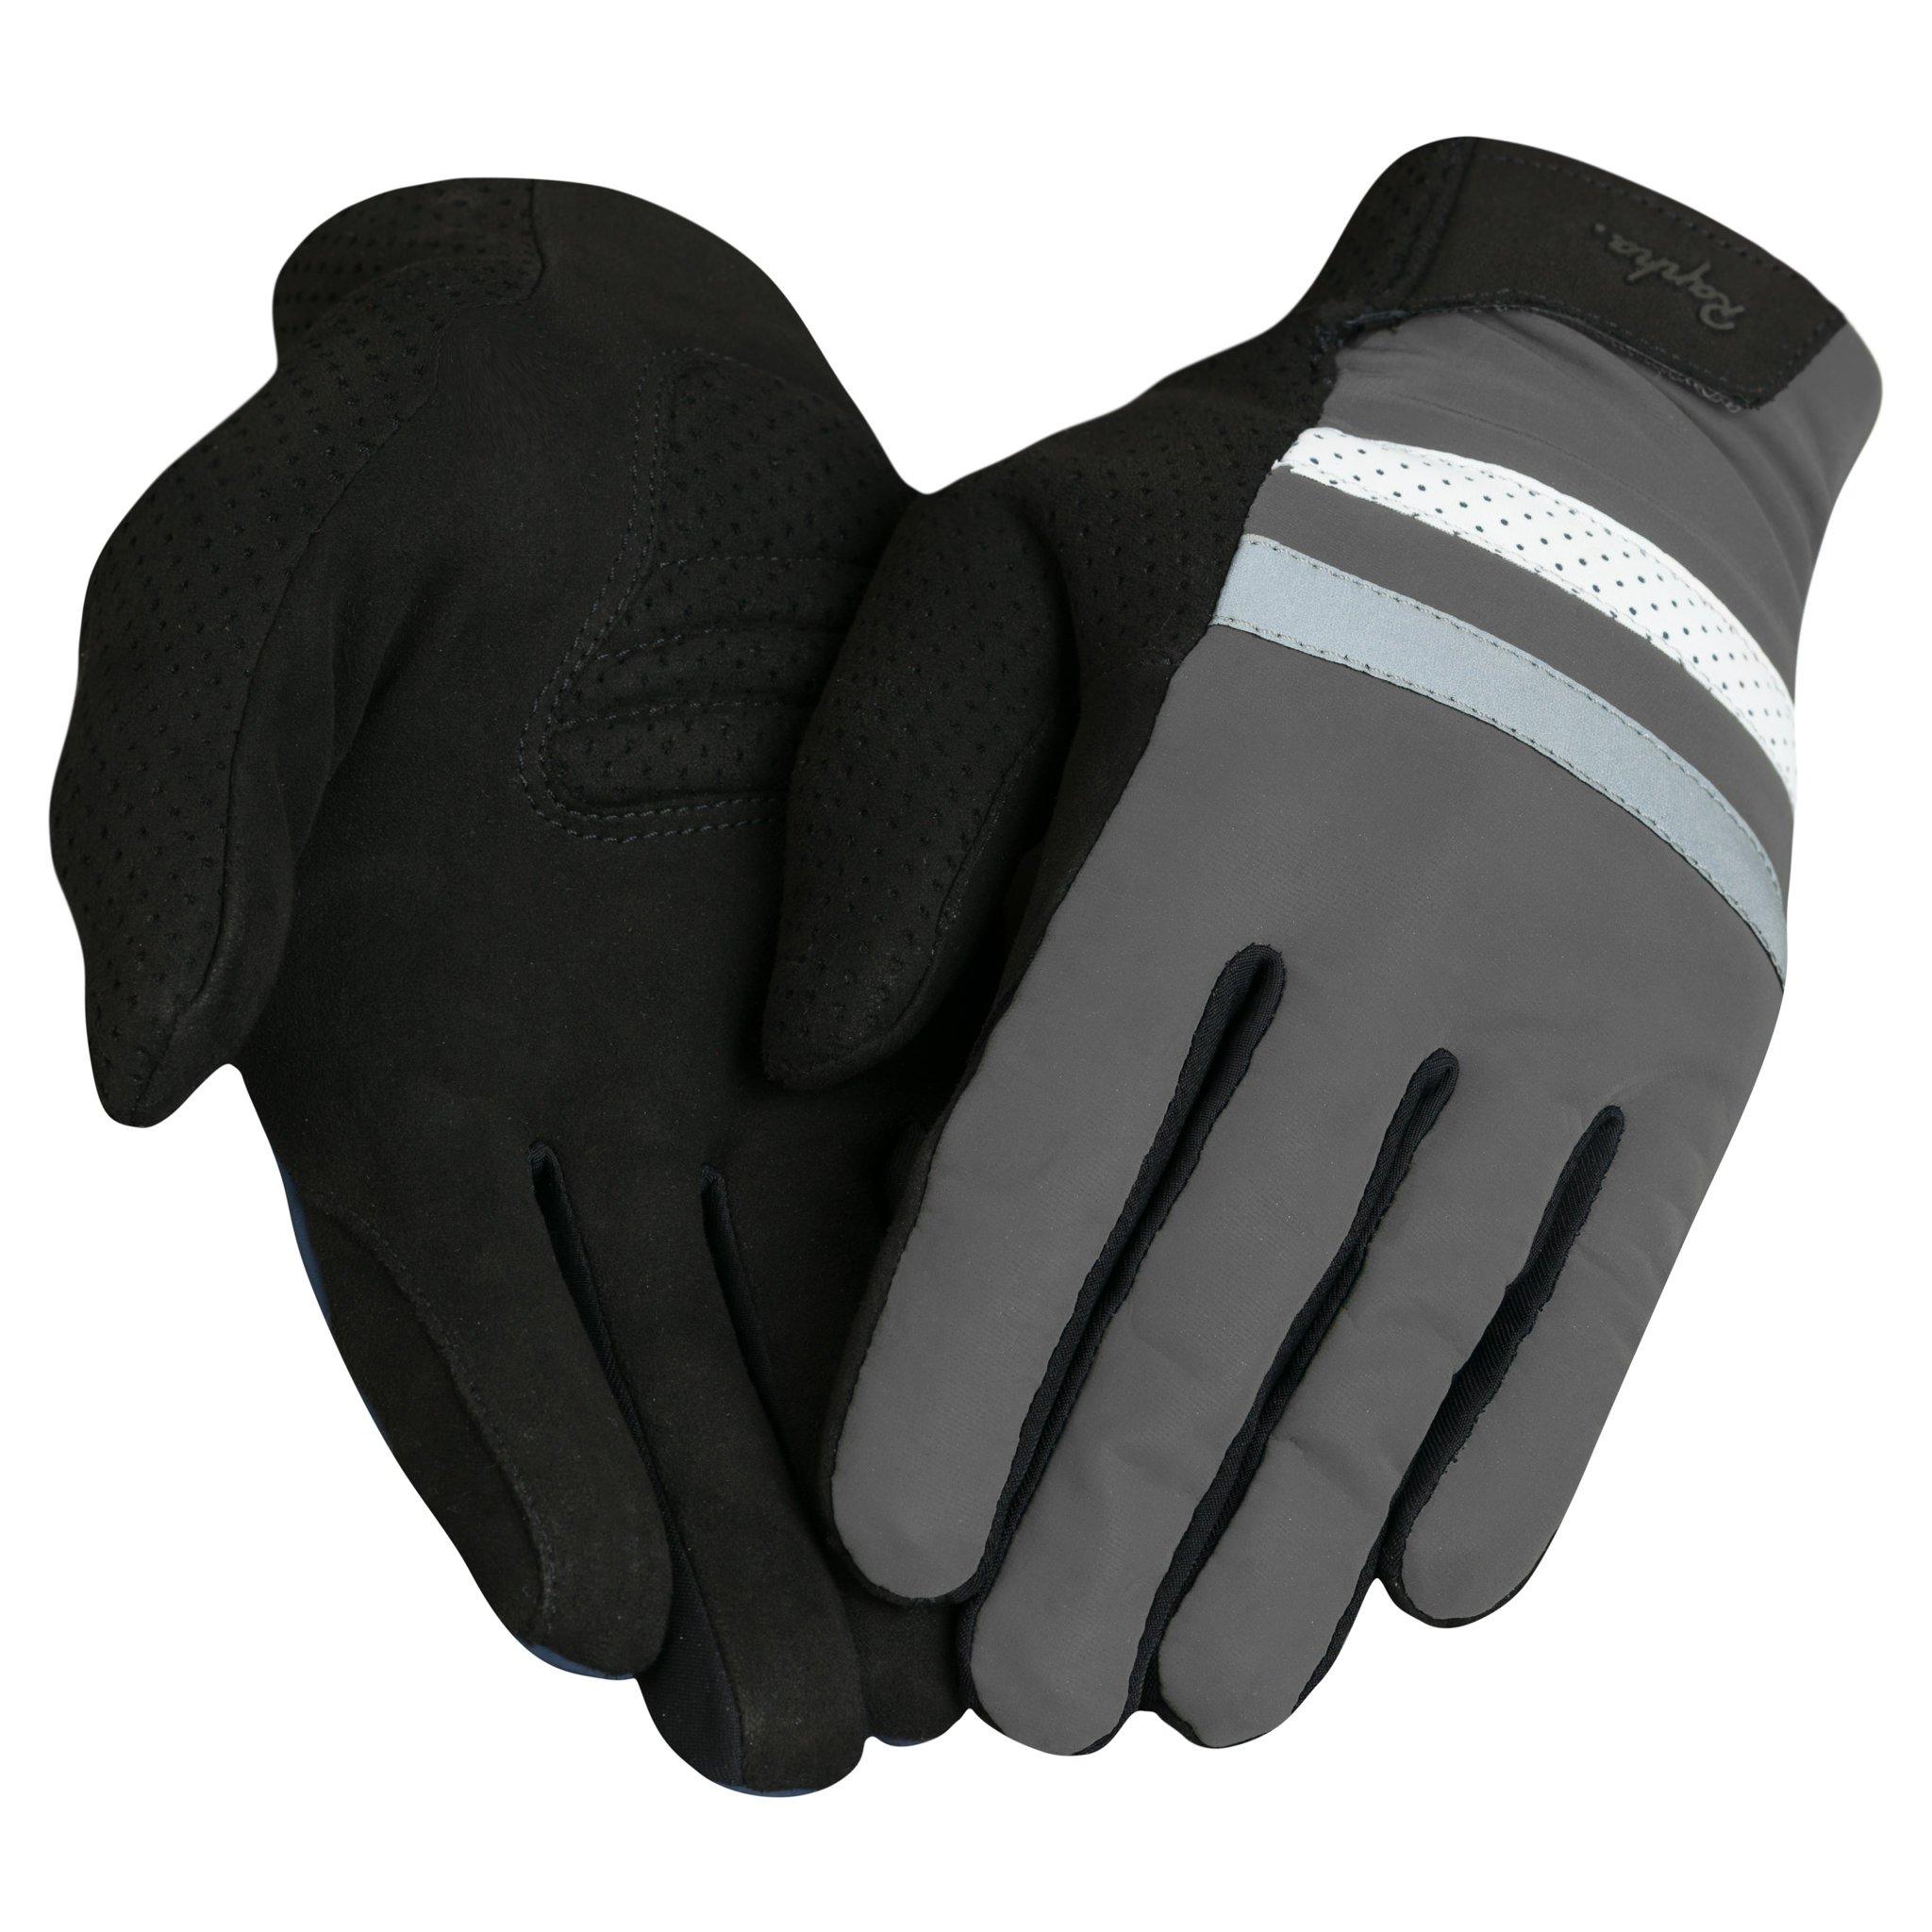 Gloves for Reflective Gloves and Riding Men\'s | Winter | Reflective Cycling Brevet Commuting Rapha